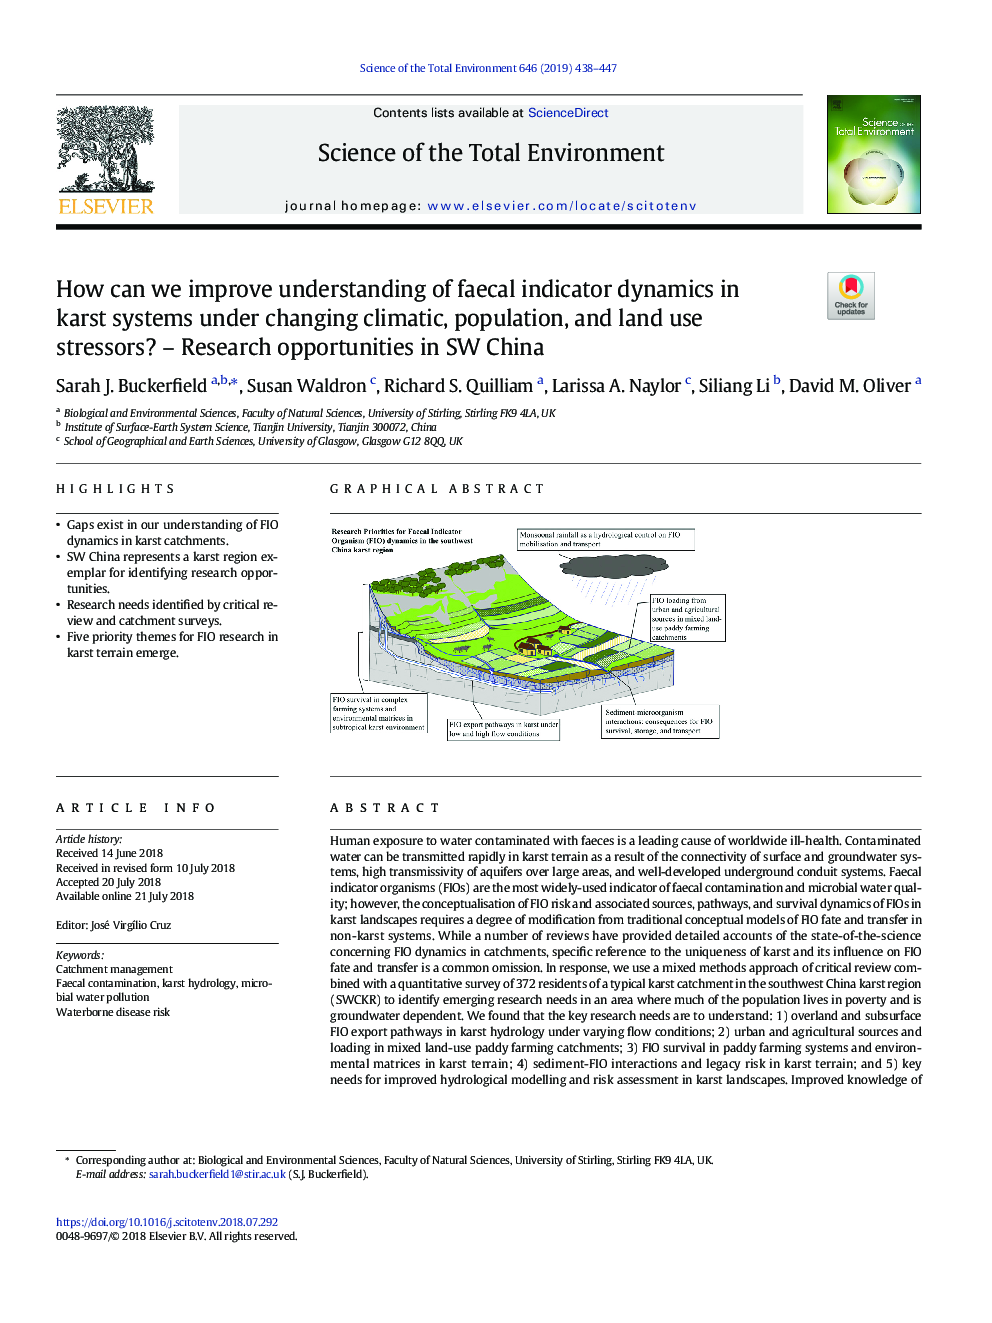 How can we improve understanding of faecal indicator dynamics in karst systems under changing climatic, population, and land use stressors? - Research opportunities in SW China